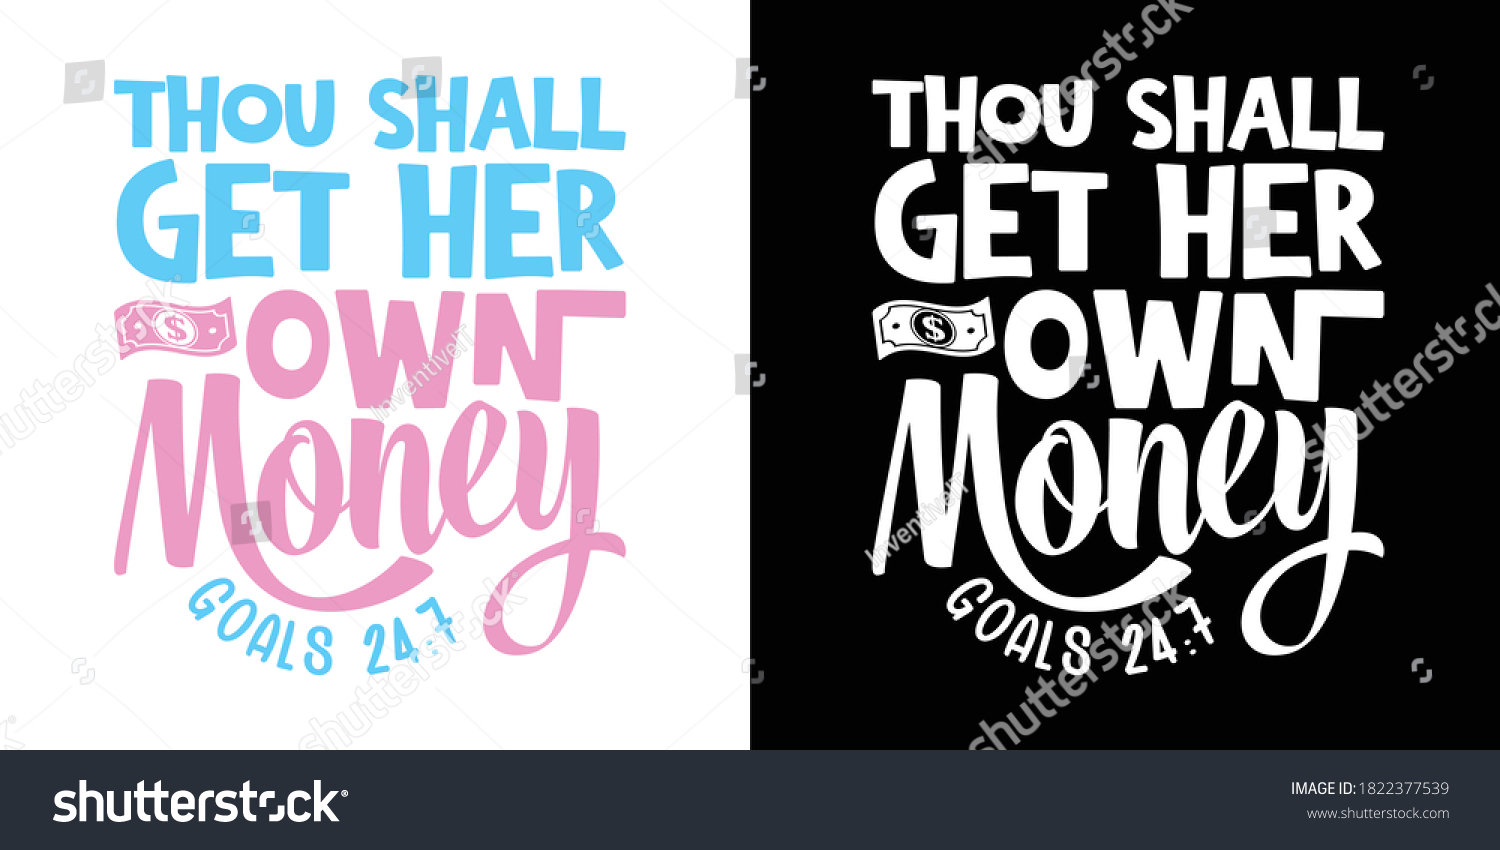 SVG of Thou Shall Get Her Own Money Printable Text Vector Illustration svg